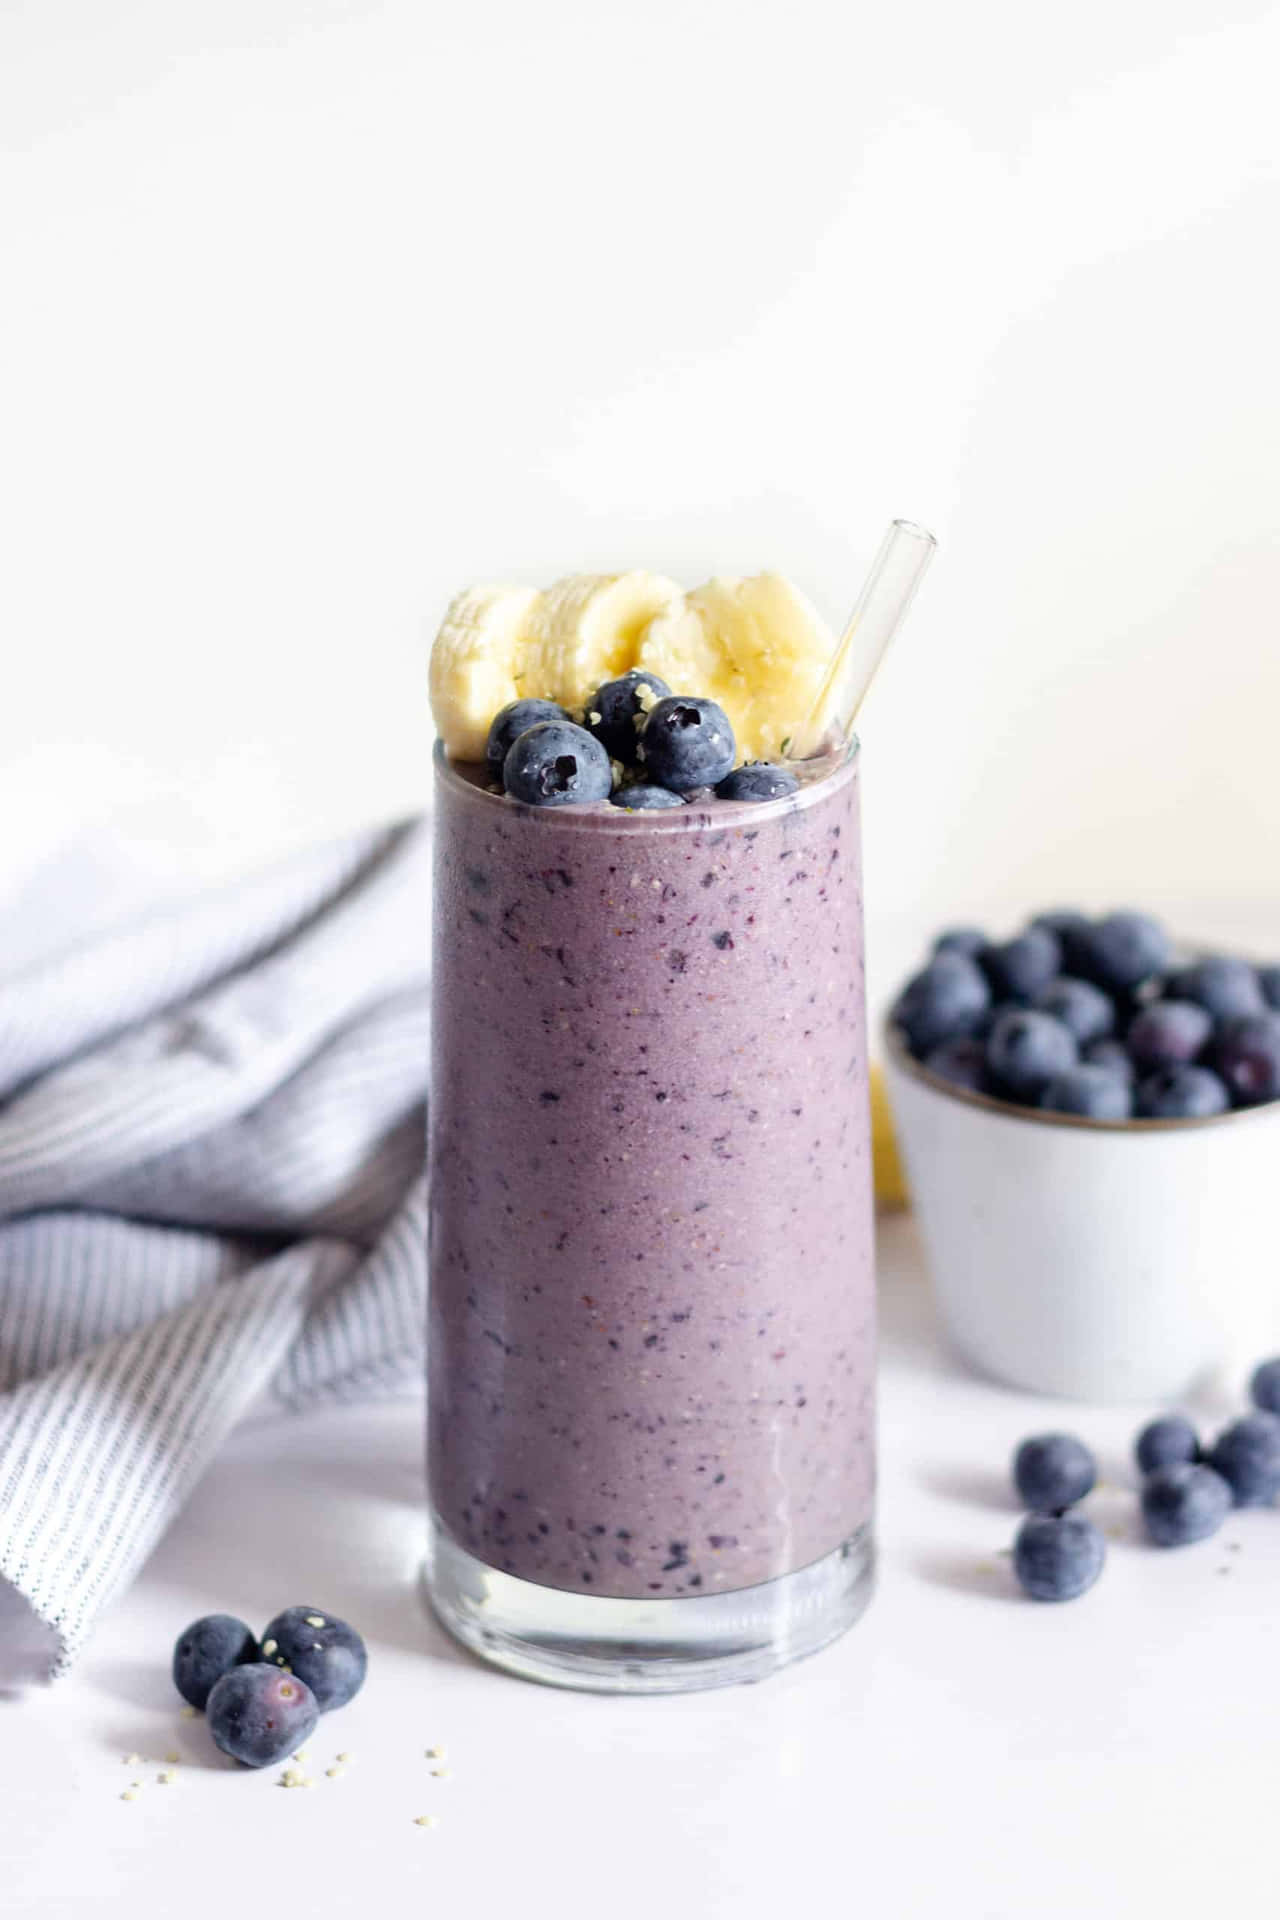 Enjoy a refreshing and healthy blueberry smoothie. Wallpaper